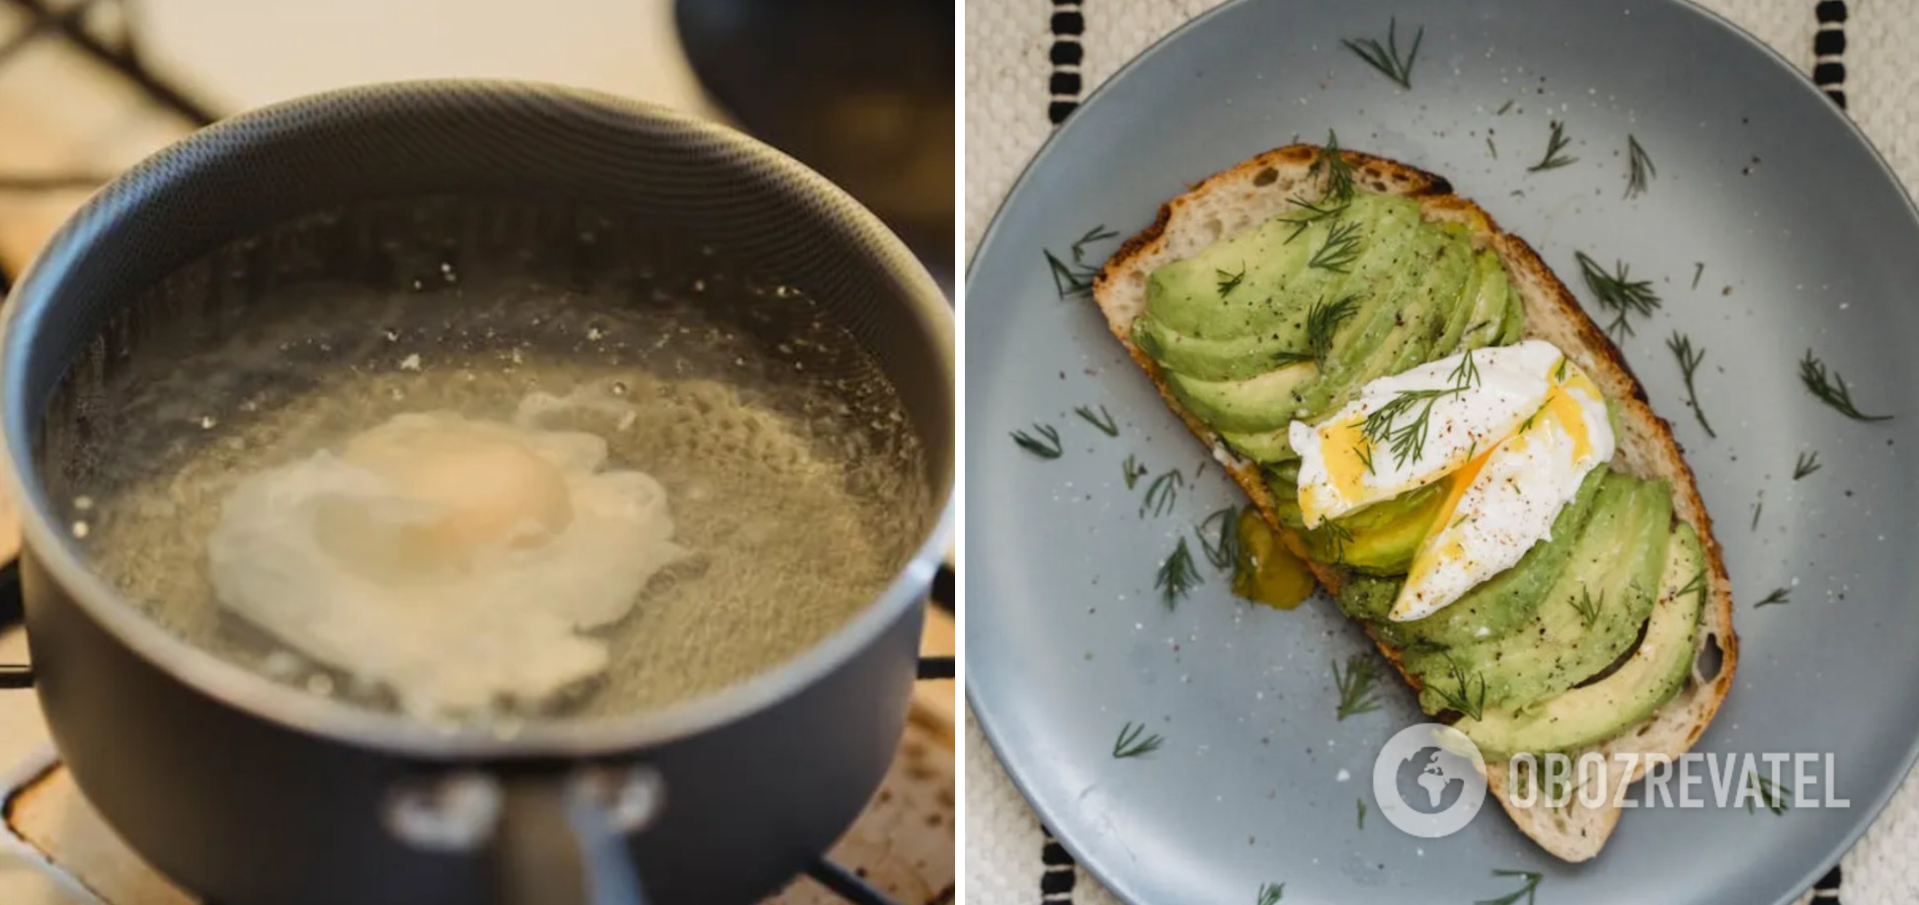 How to boil a poached egg in 2 minutes